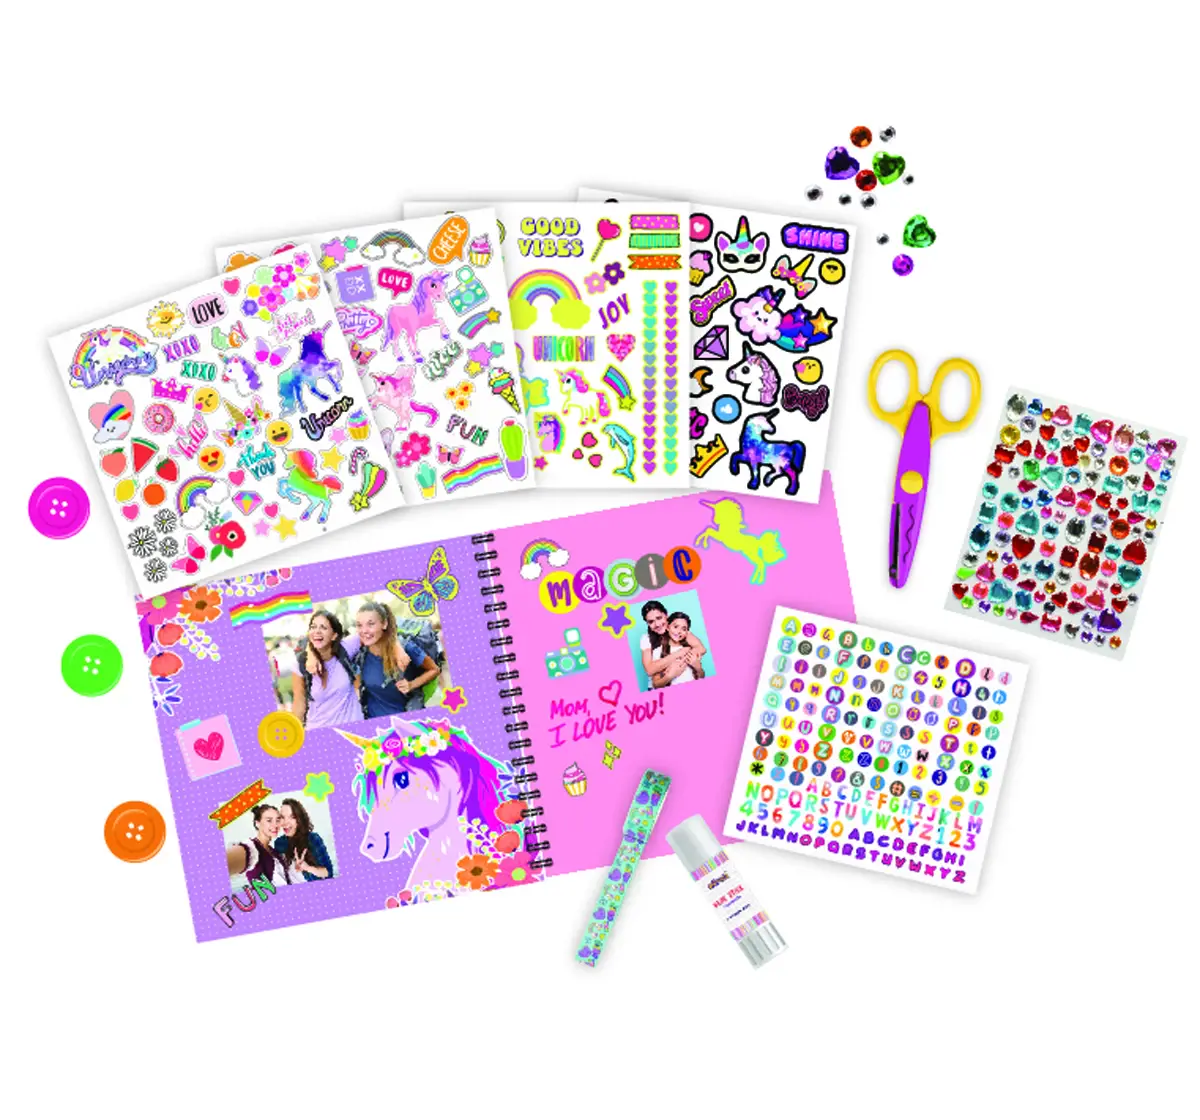 Create Your Own Unicorn Scrapbook by Mirada, Includes 430 Pcs & Glow In The Dark Stickers, Multicolour, 3 Years+